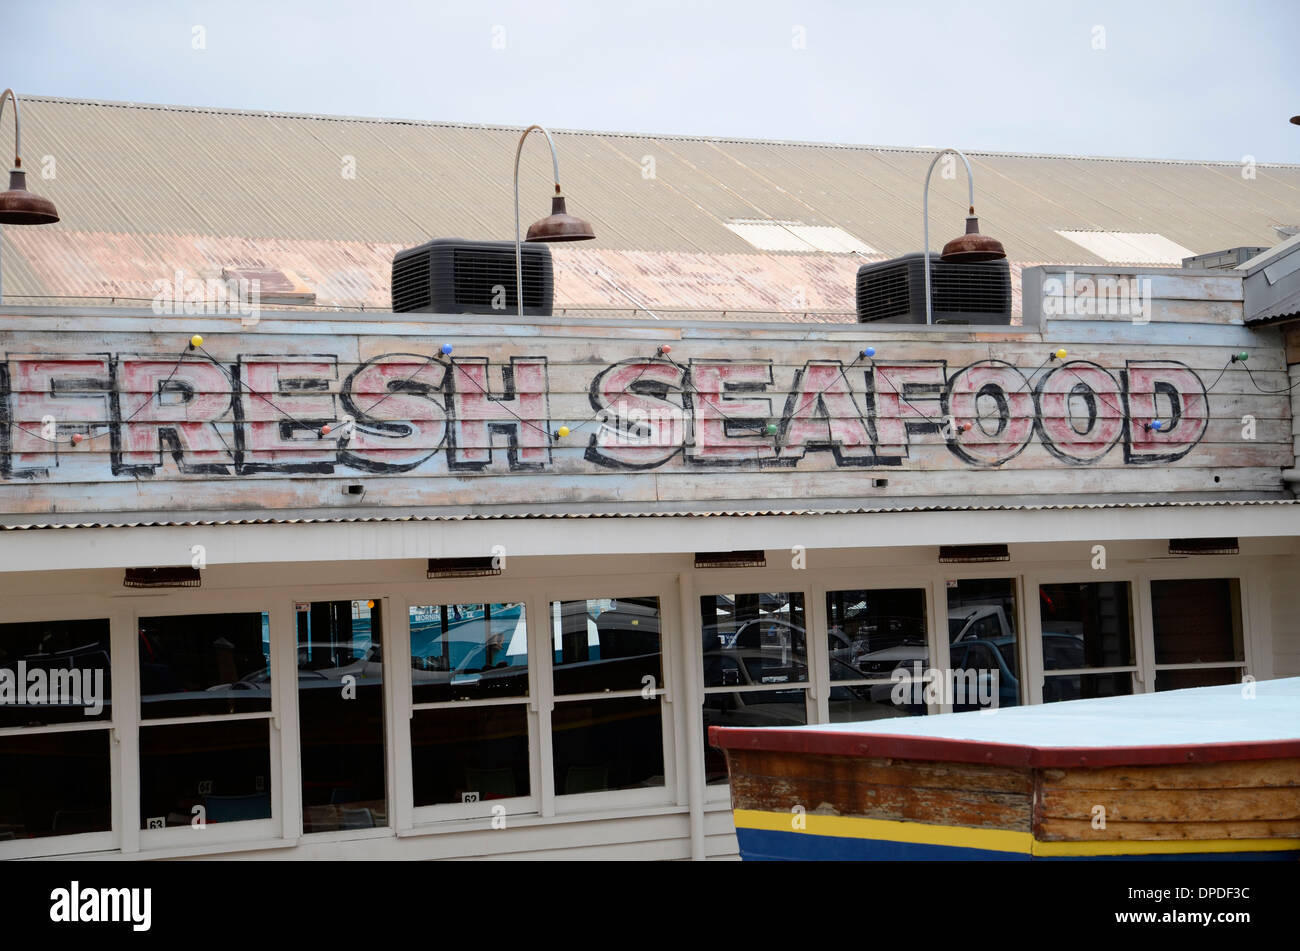 A Fresh Seafood sign on a restaurant in Fremantle, Western Australia Stock Photo